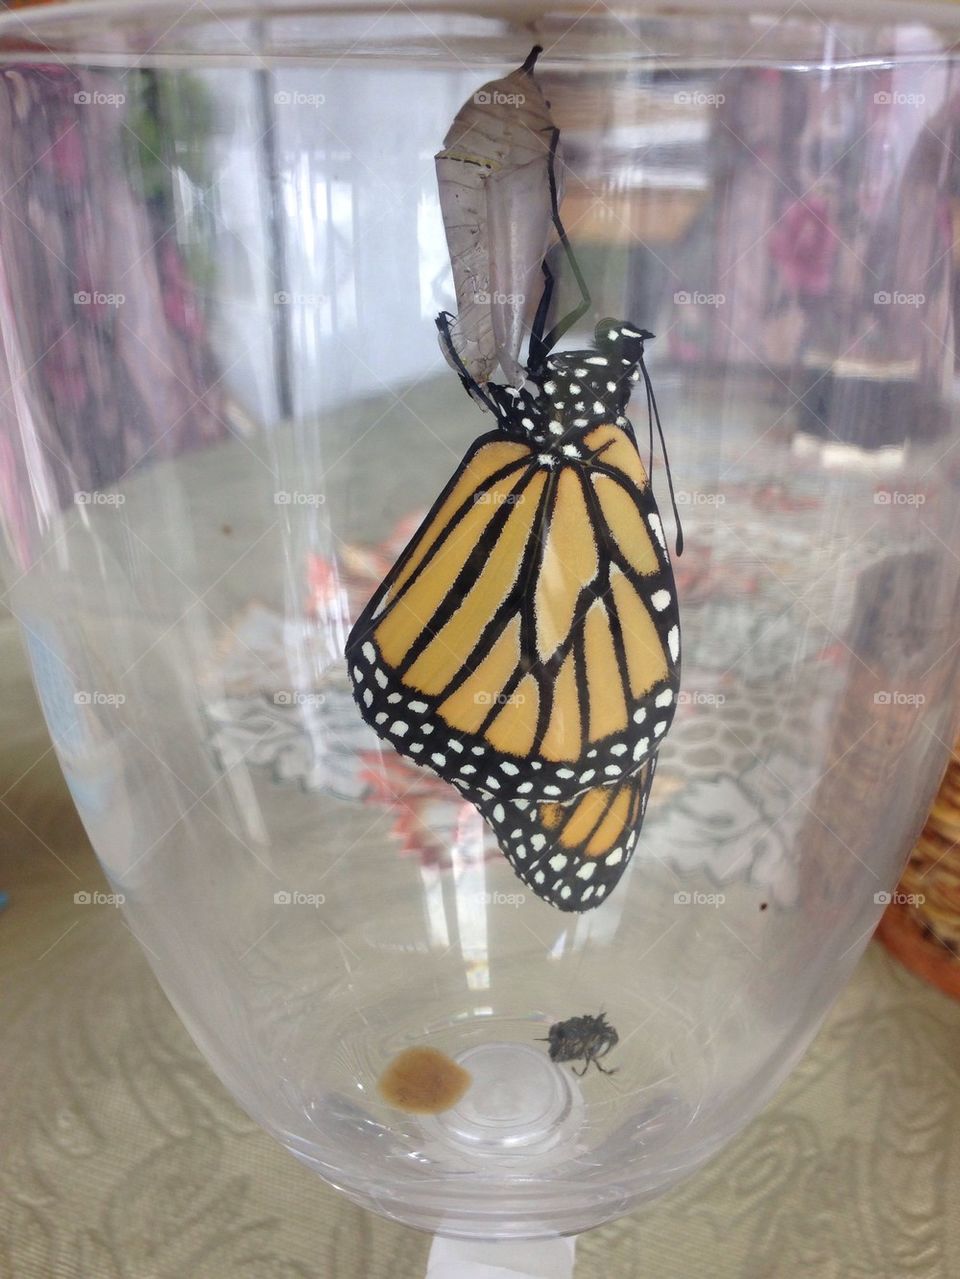 Monarch butterfly hatching